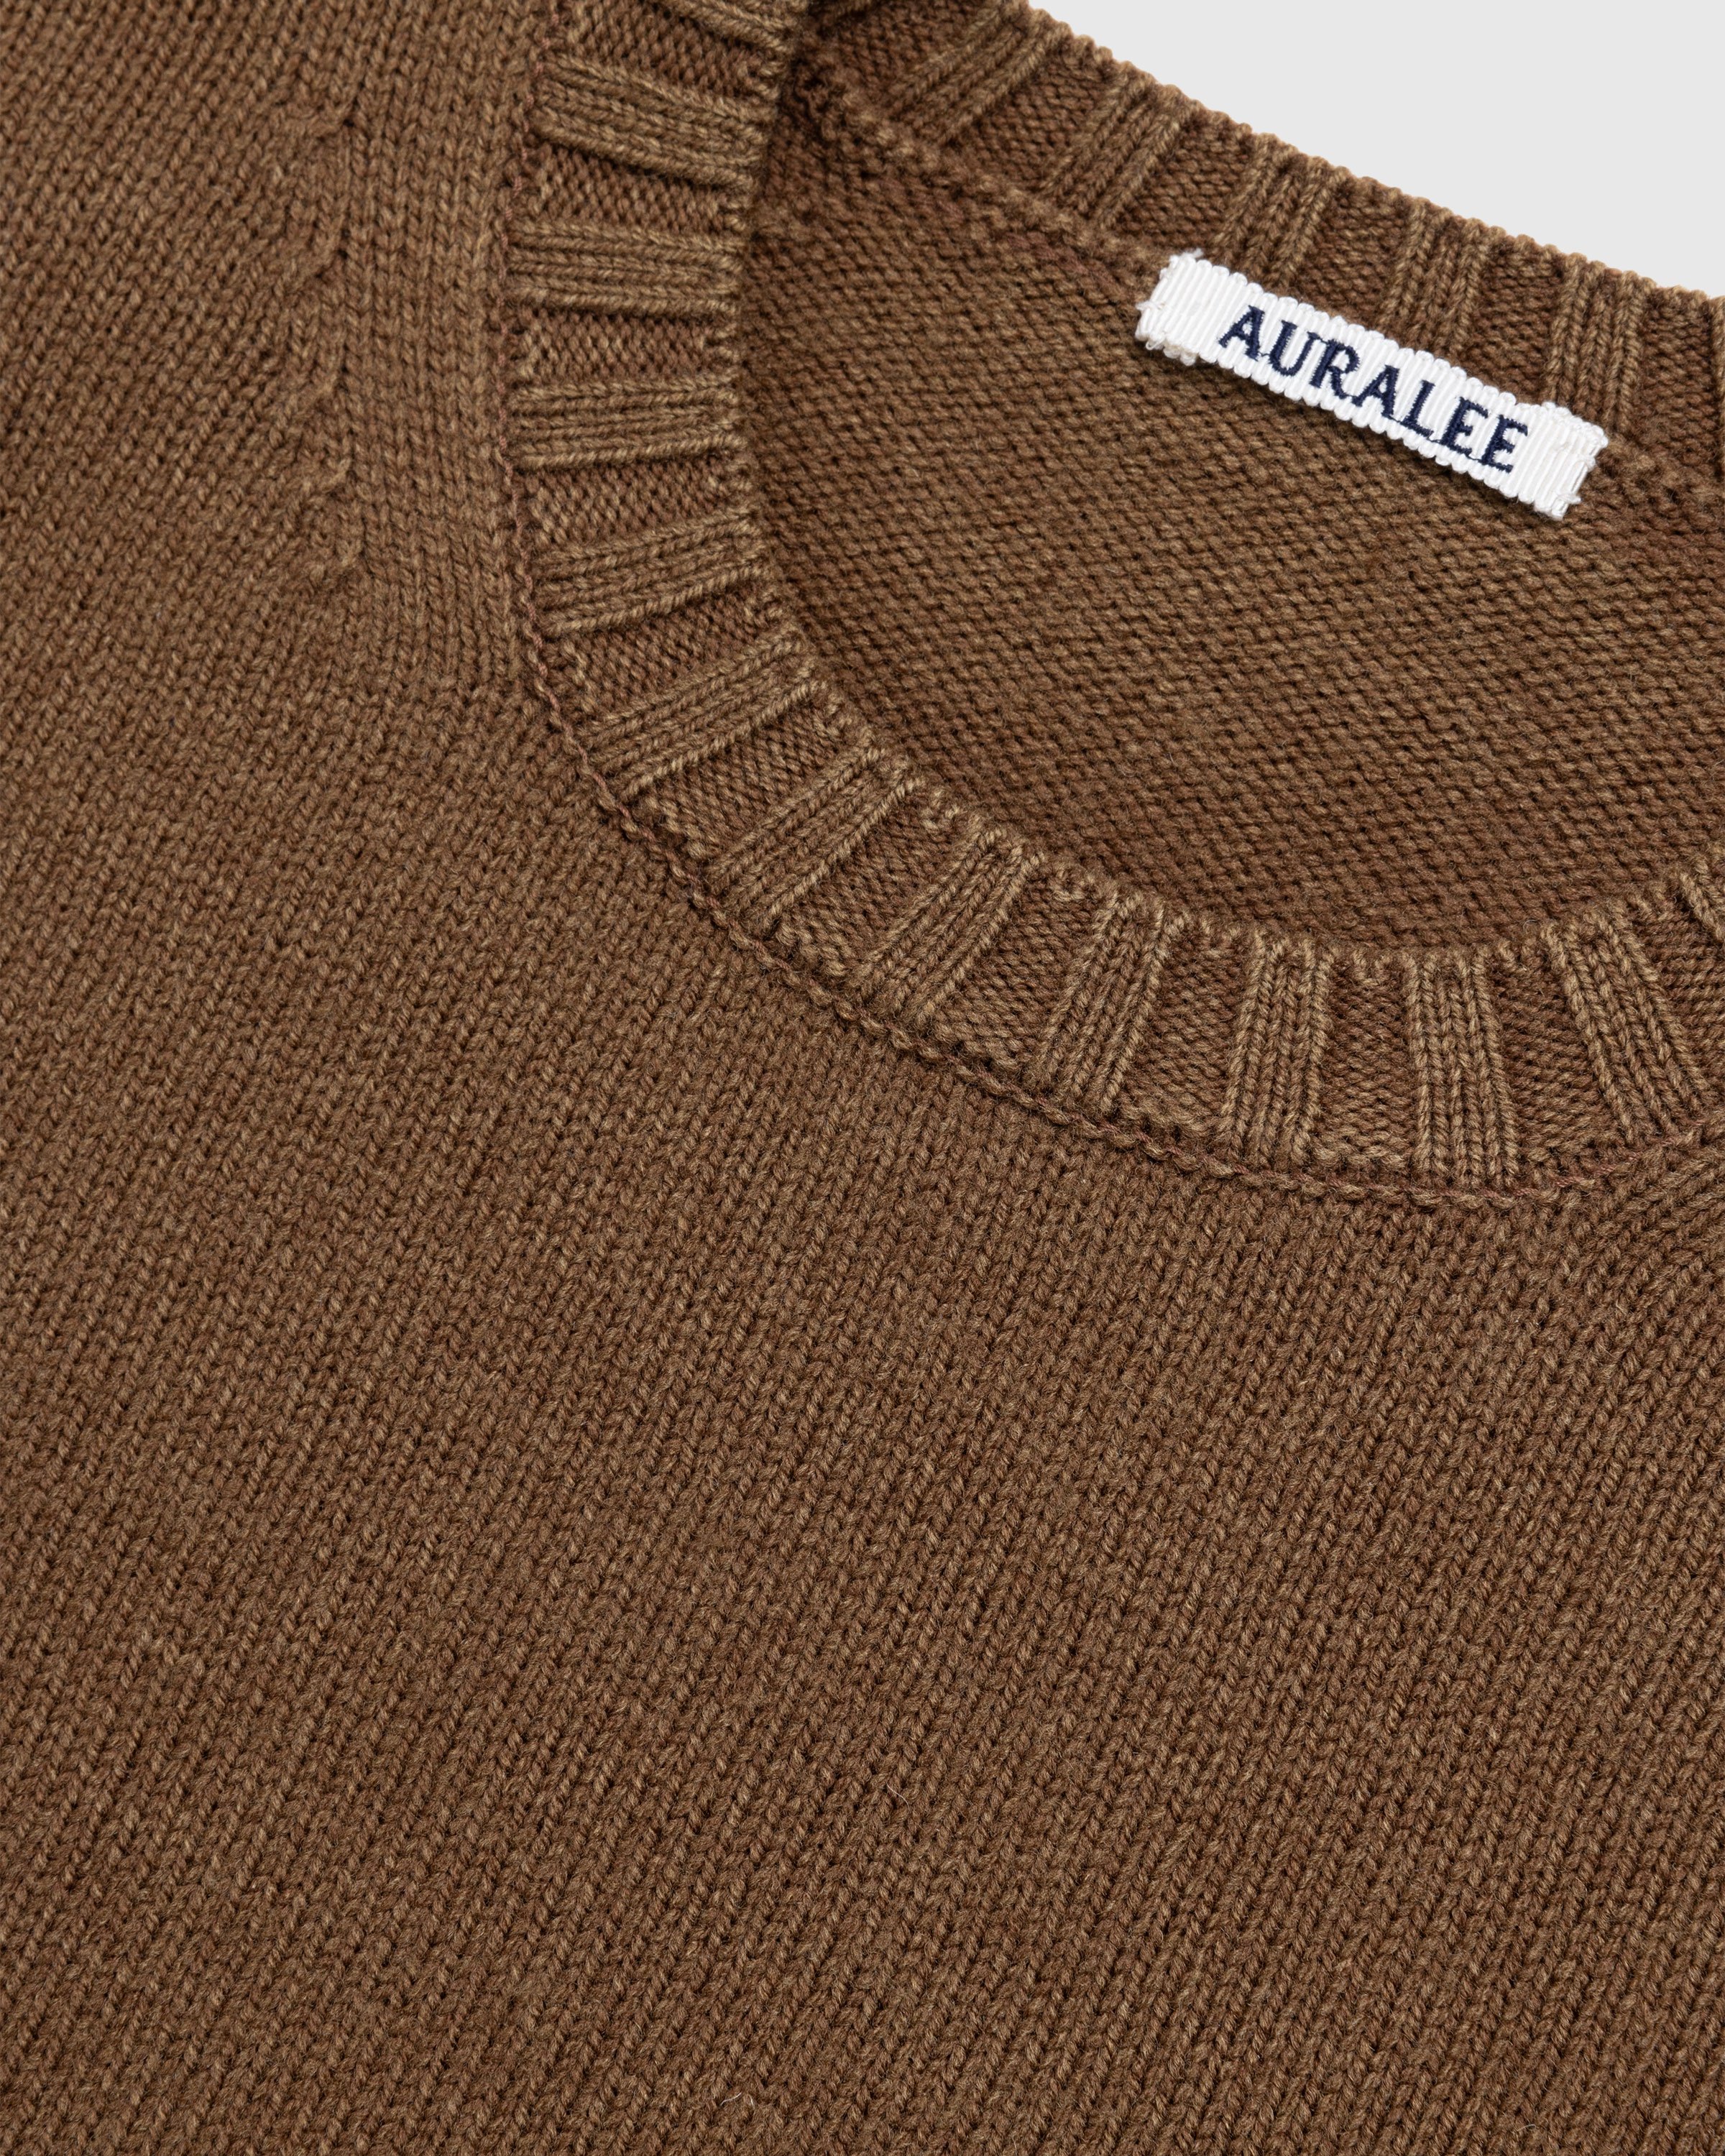 Auralee - Washed French Merino Knit Crewneck Brown - Clothing - Brown - Image 6